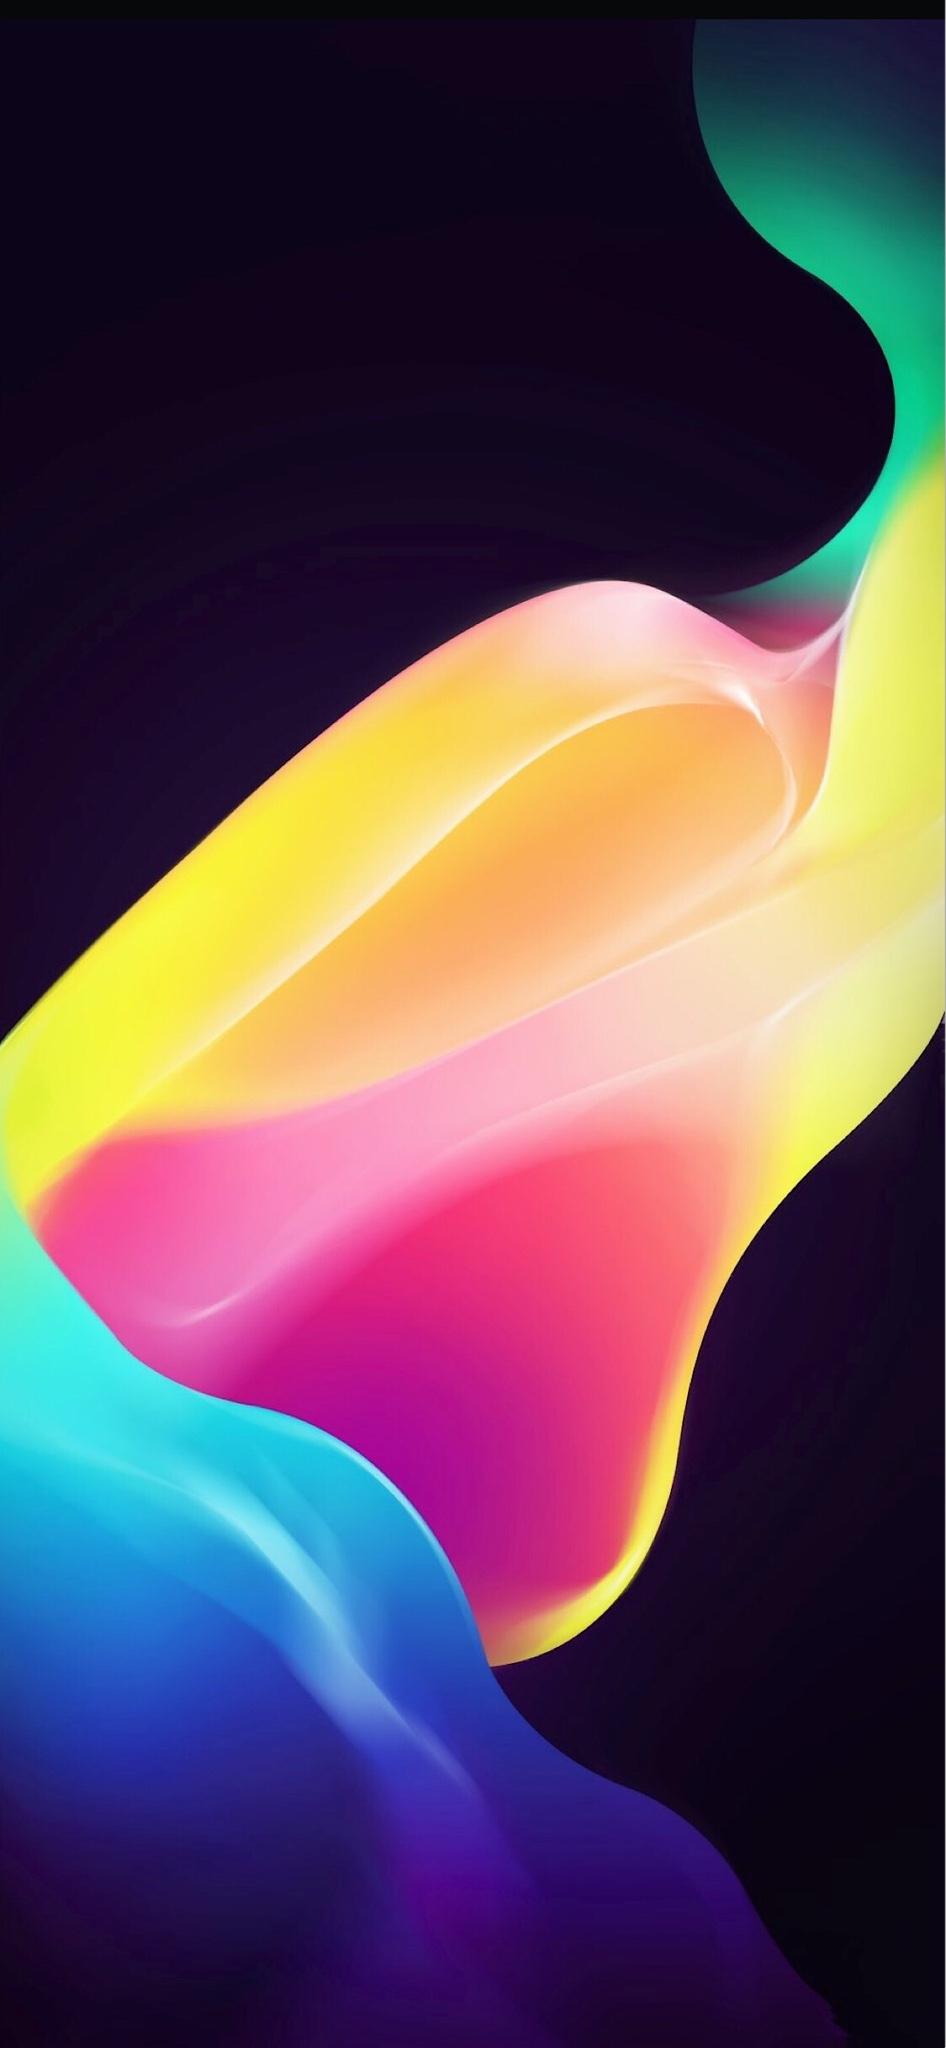 iOS 13.2 Wallpapers - Wallpaper Cave